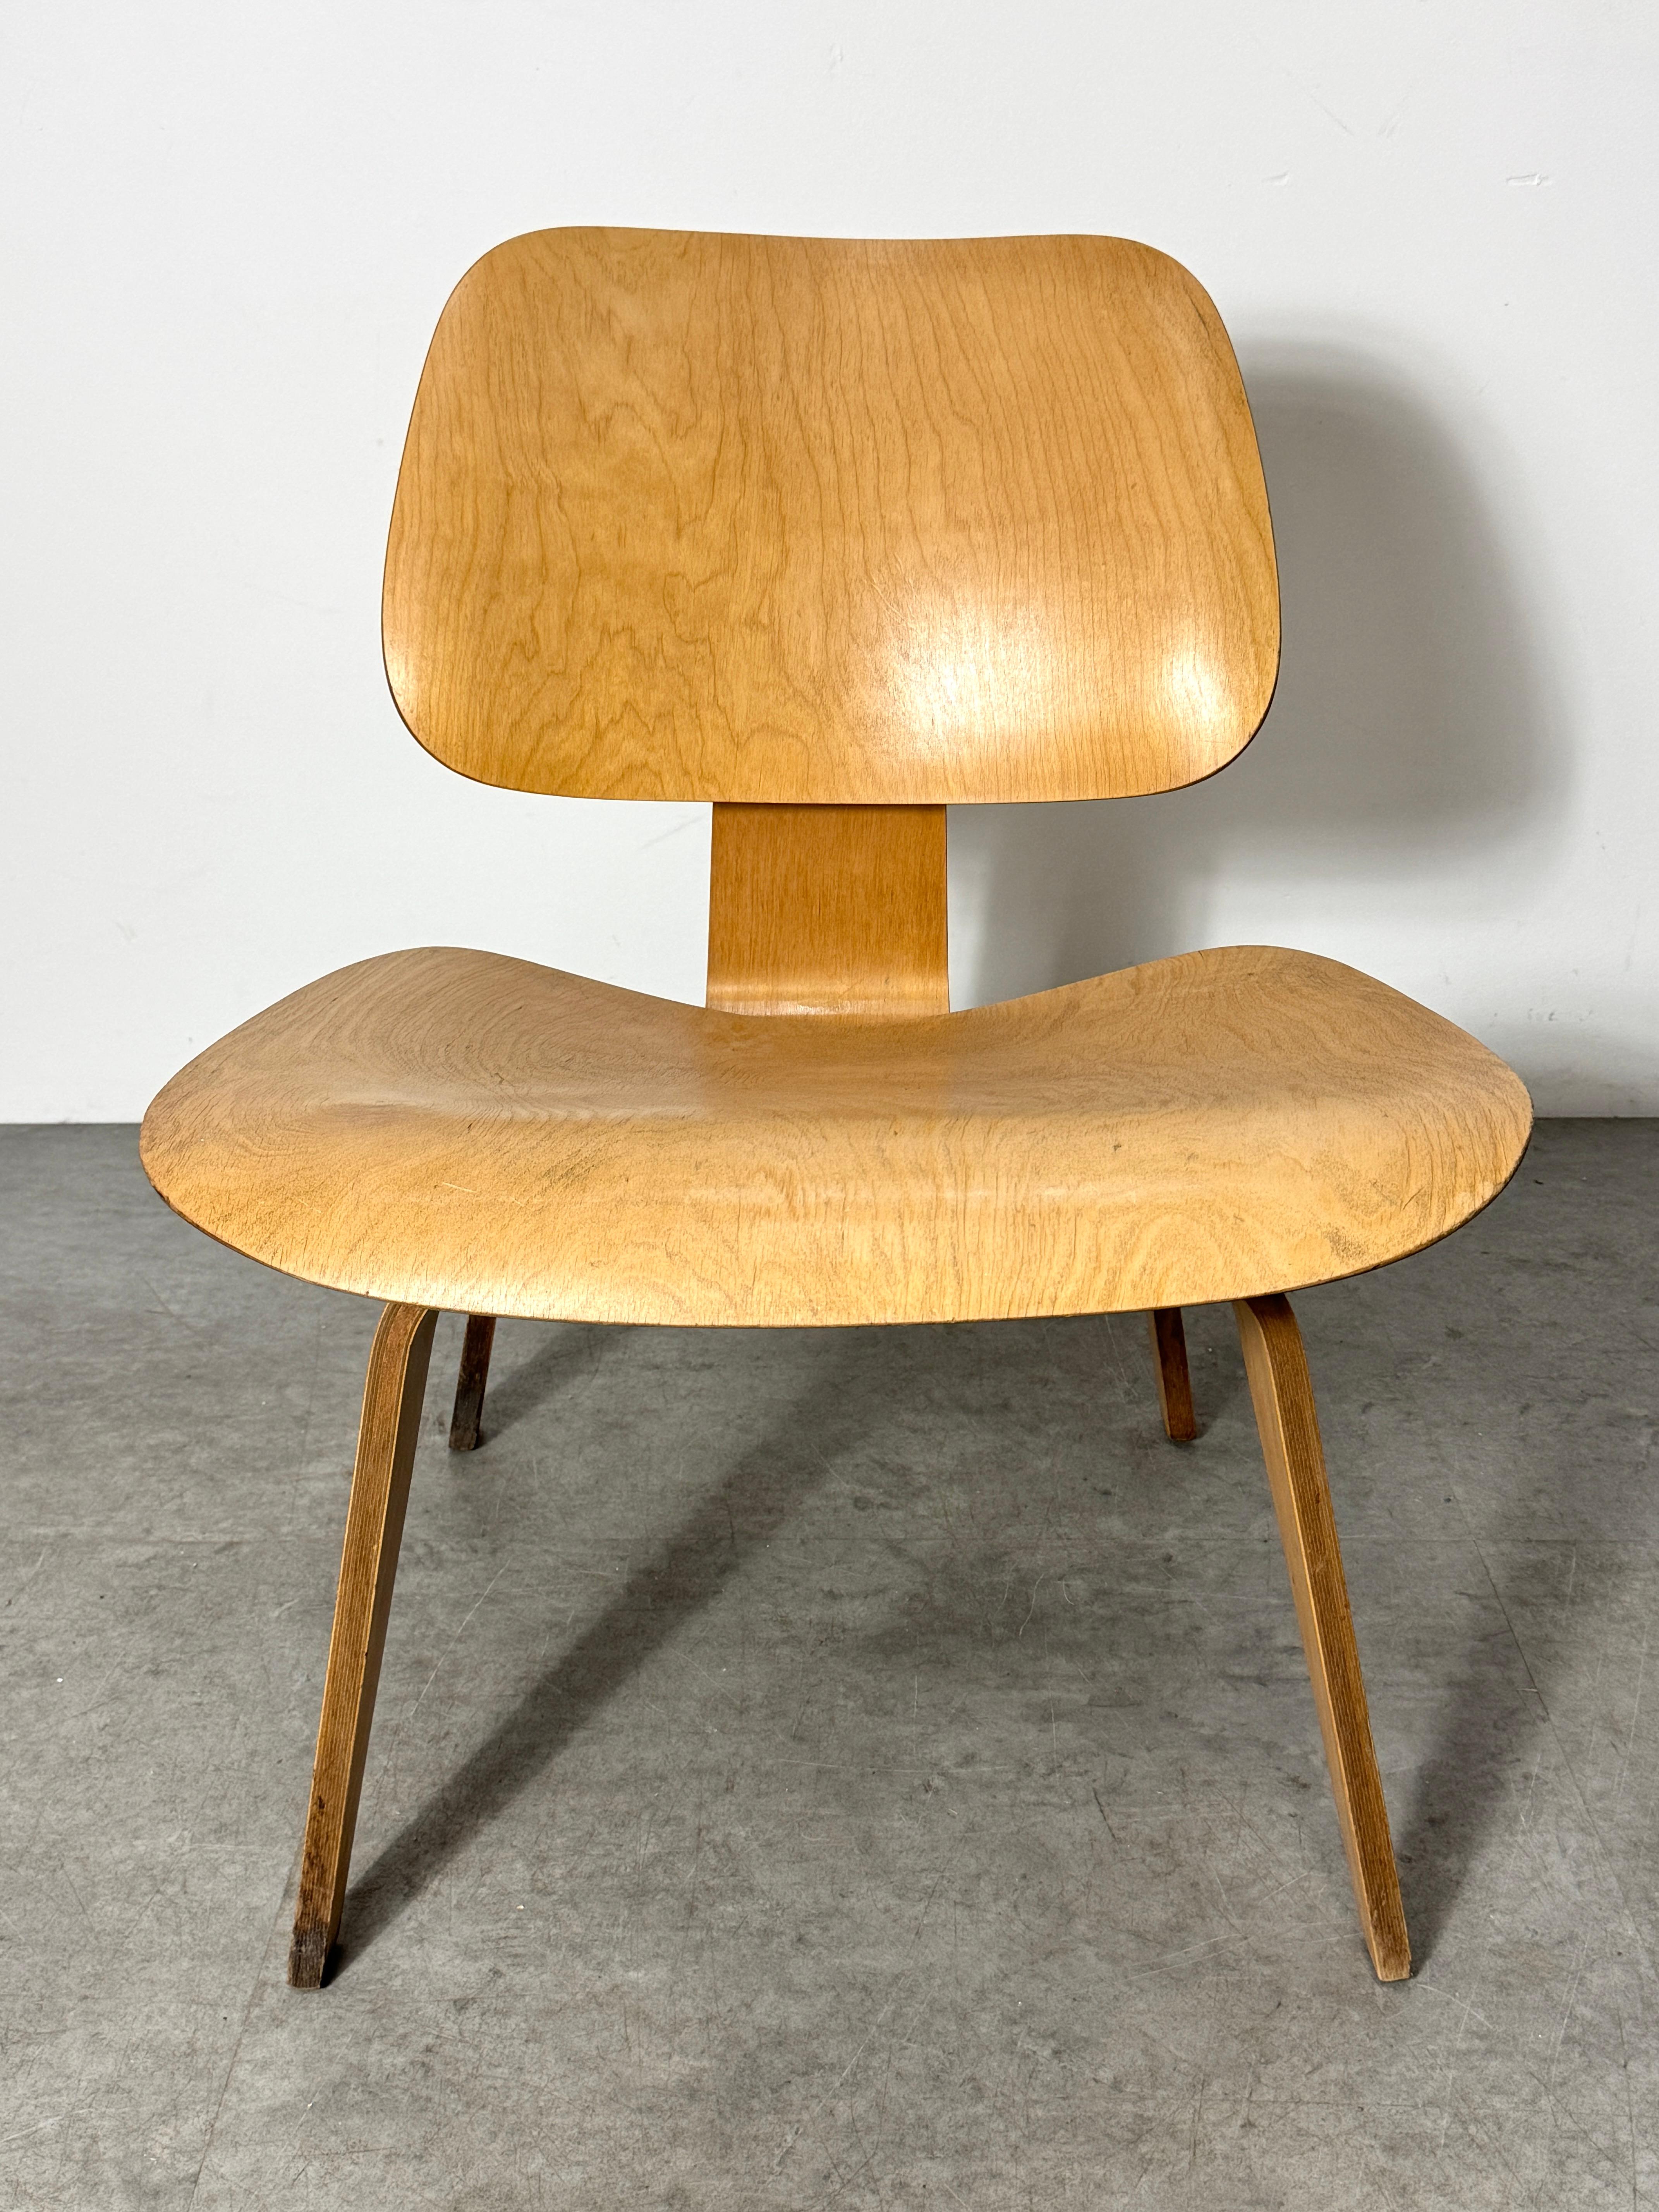 Mid-Century Modern Early Vintage Charles Eames for Herman Miller LCW Birch Plywood Lounge Chair For Sale